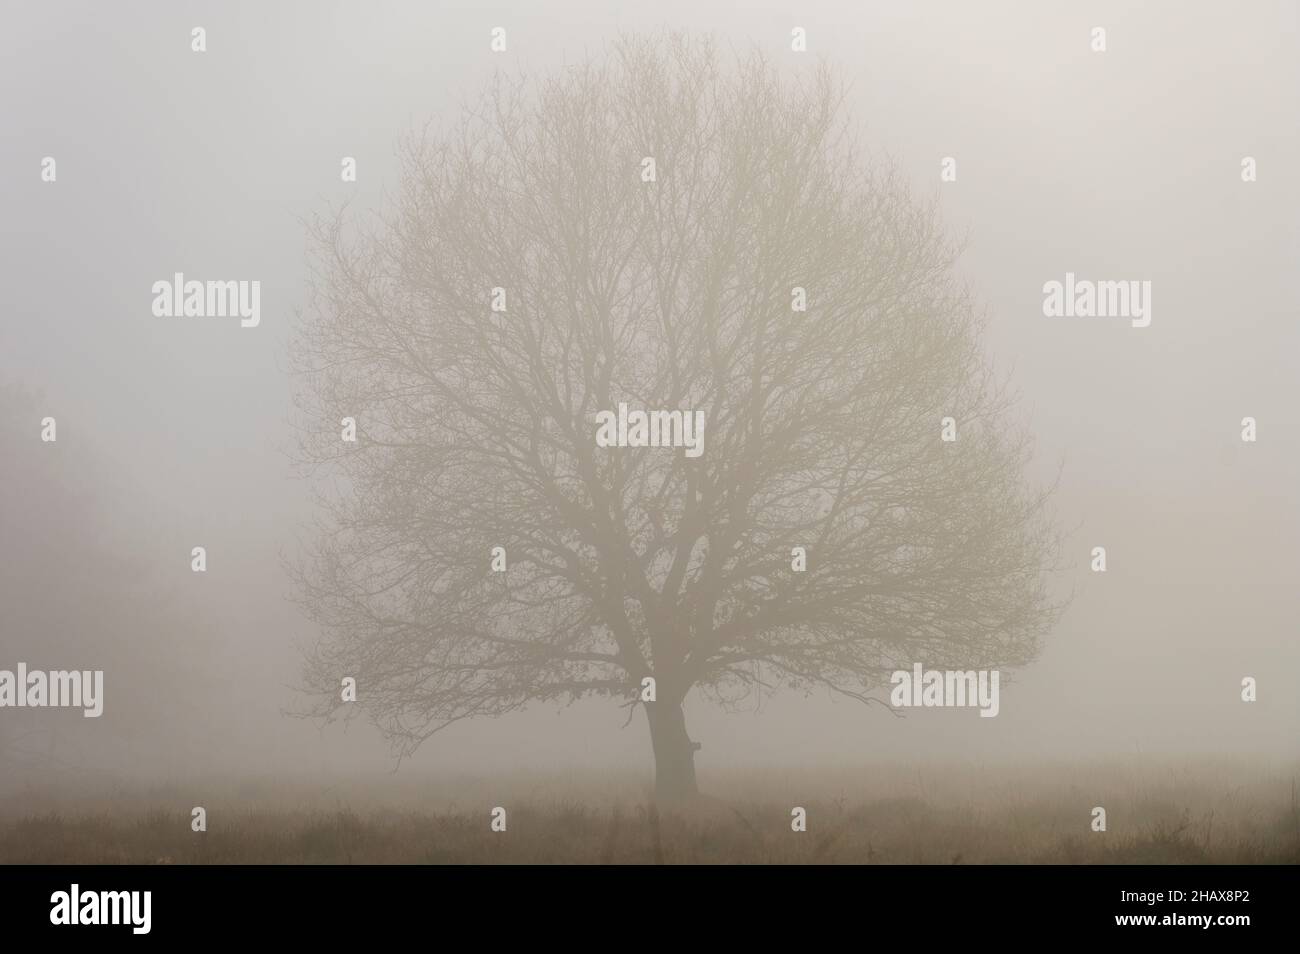 Silhouette of a solitary oak tree in the fog Stock Photo